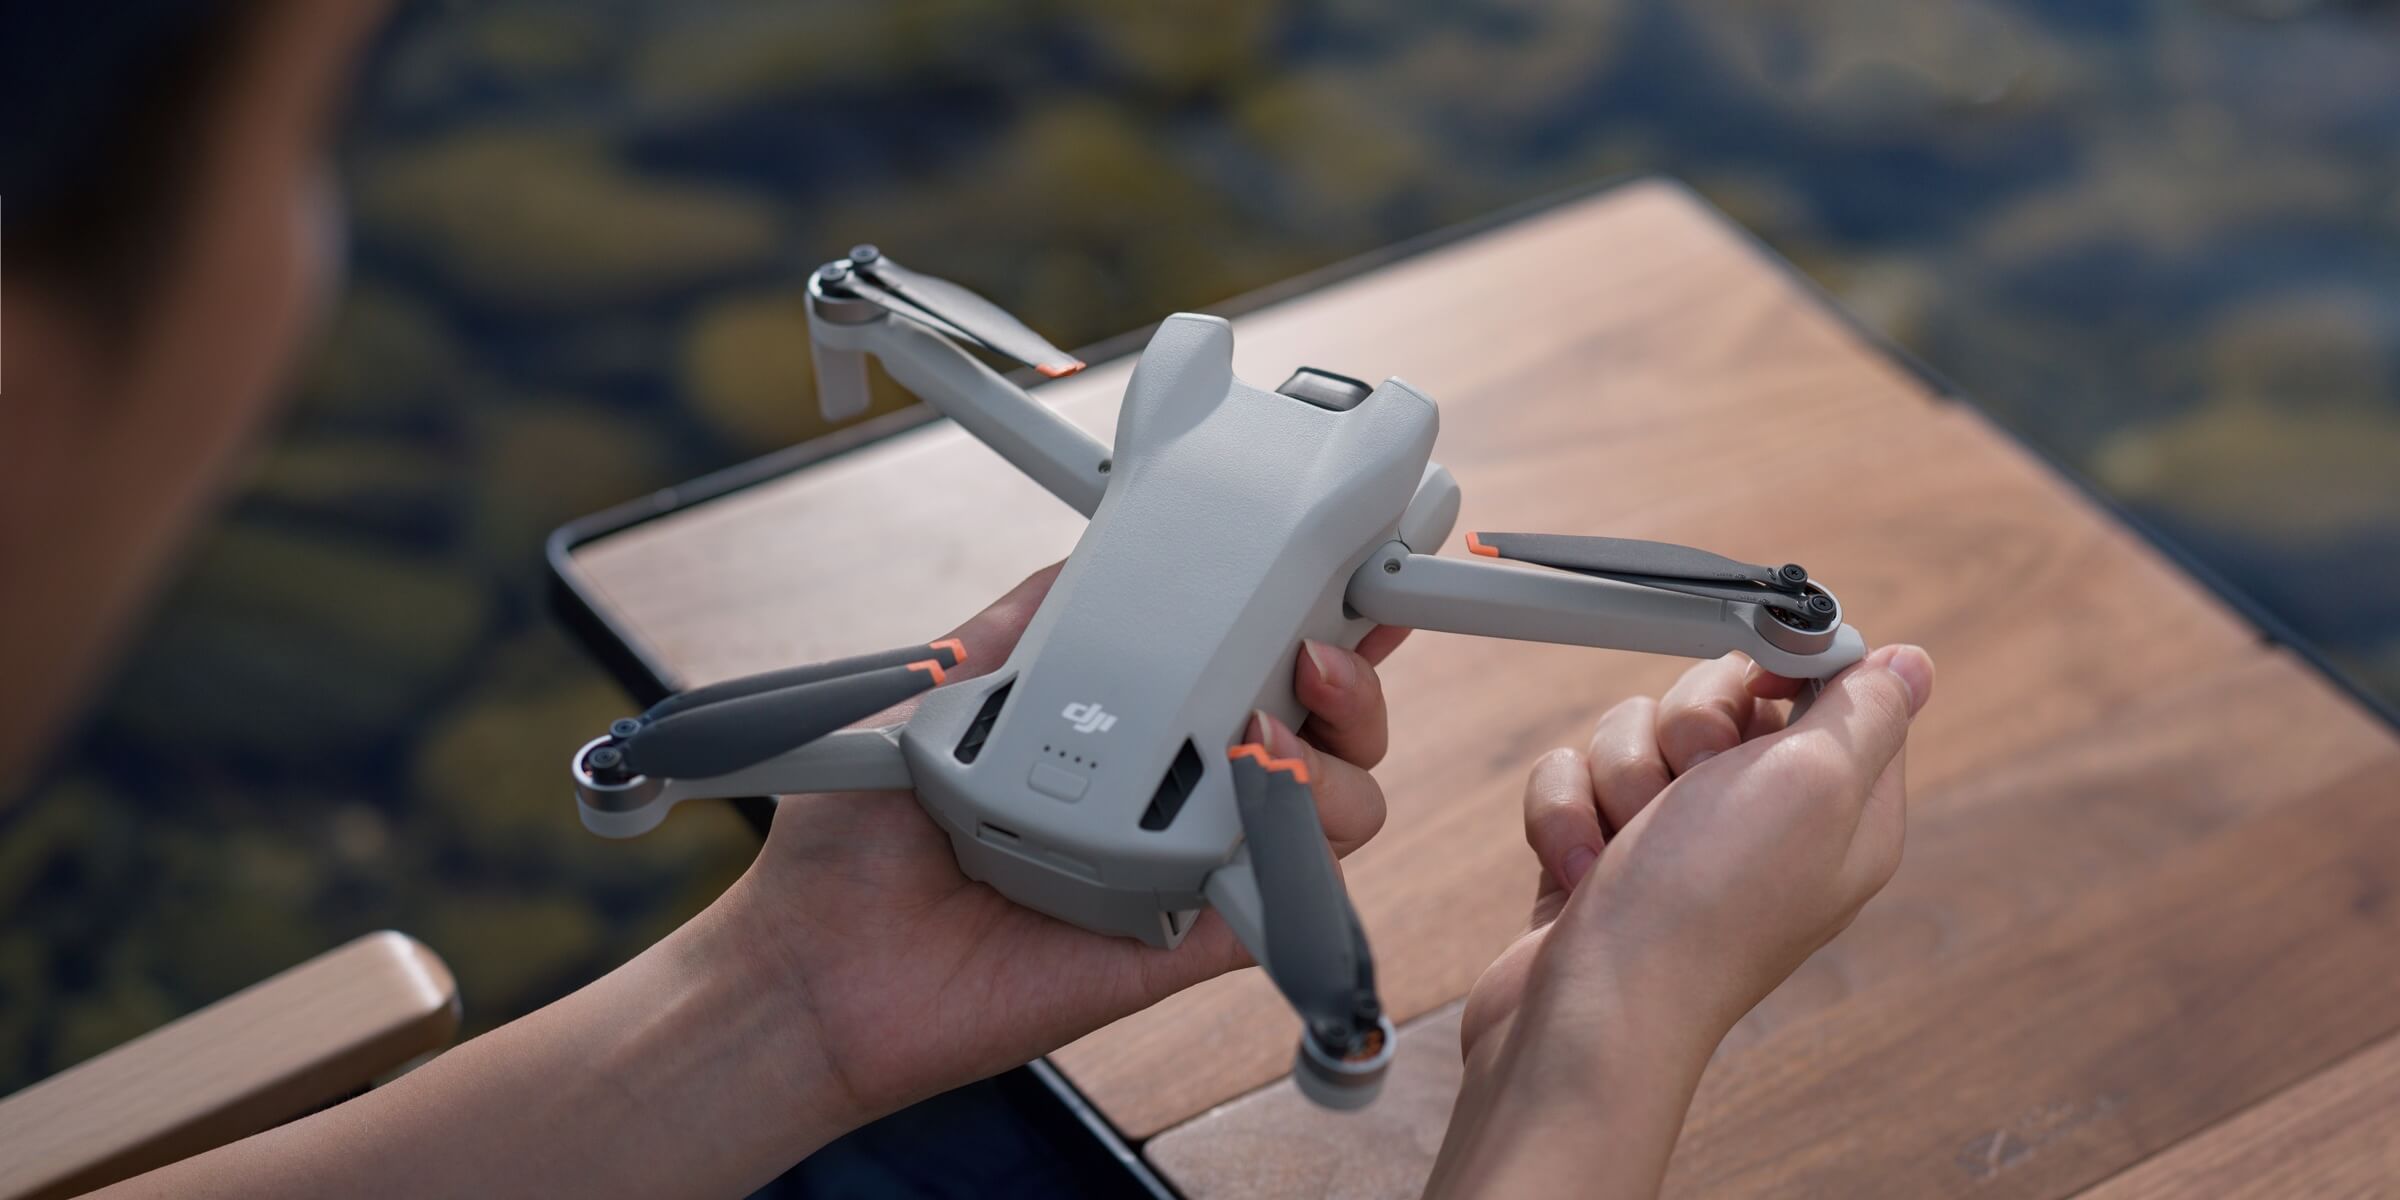 Mini drones are alway palm-sized